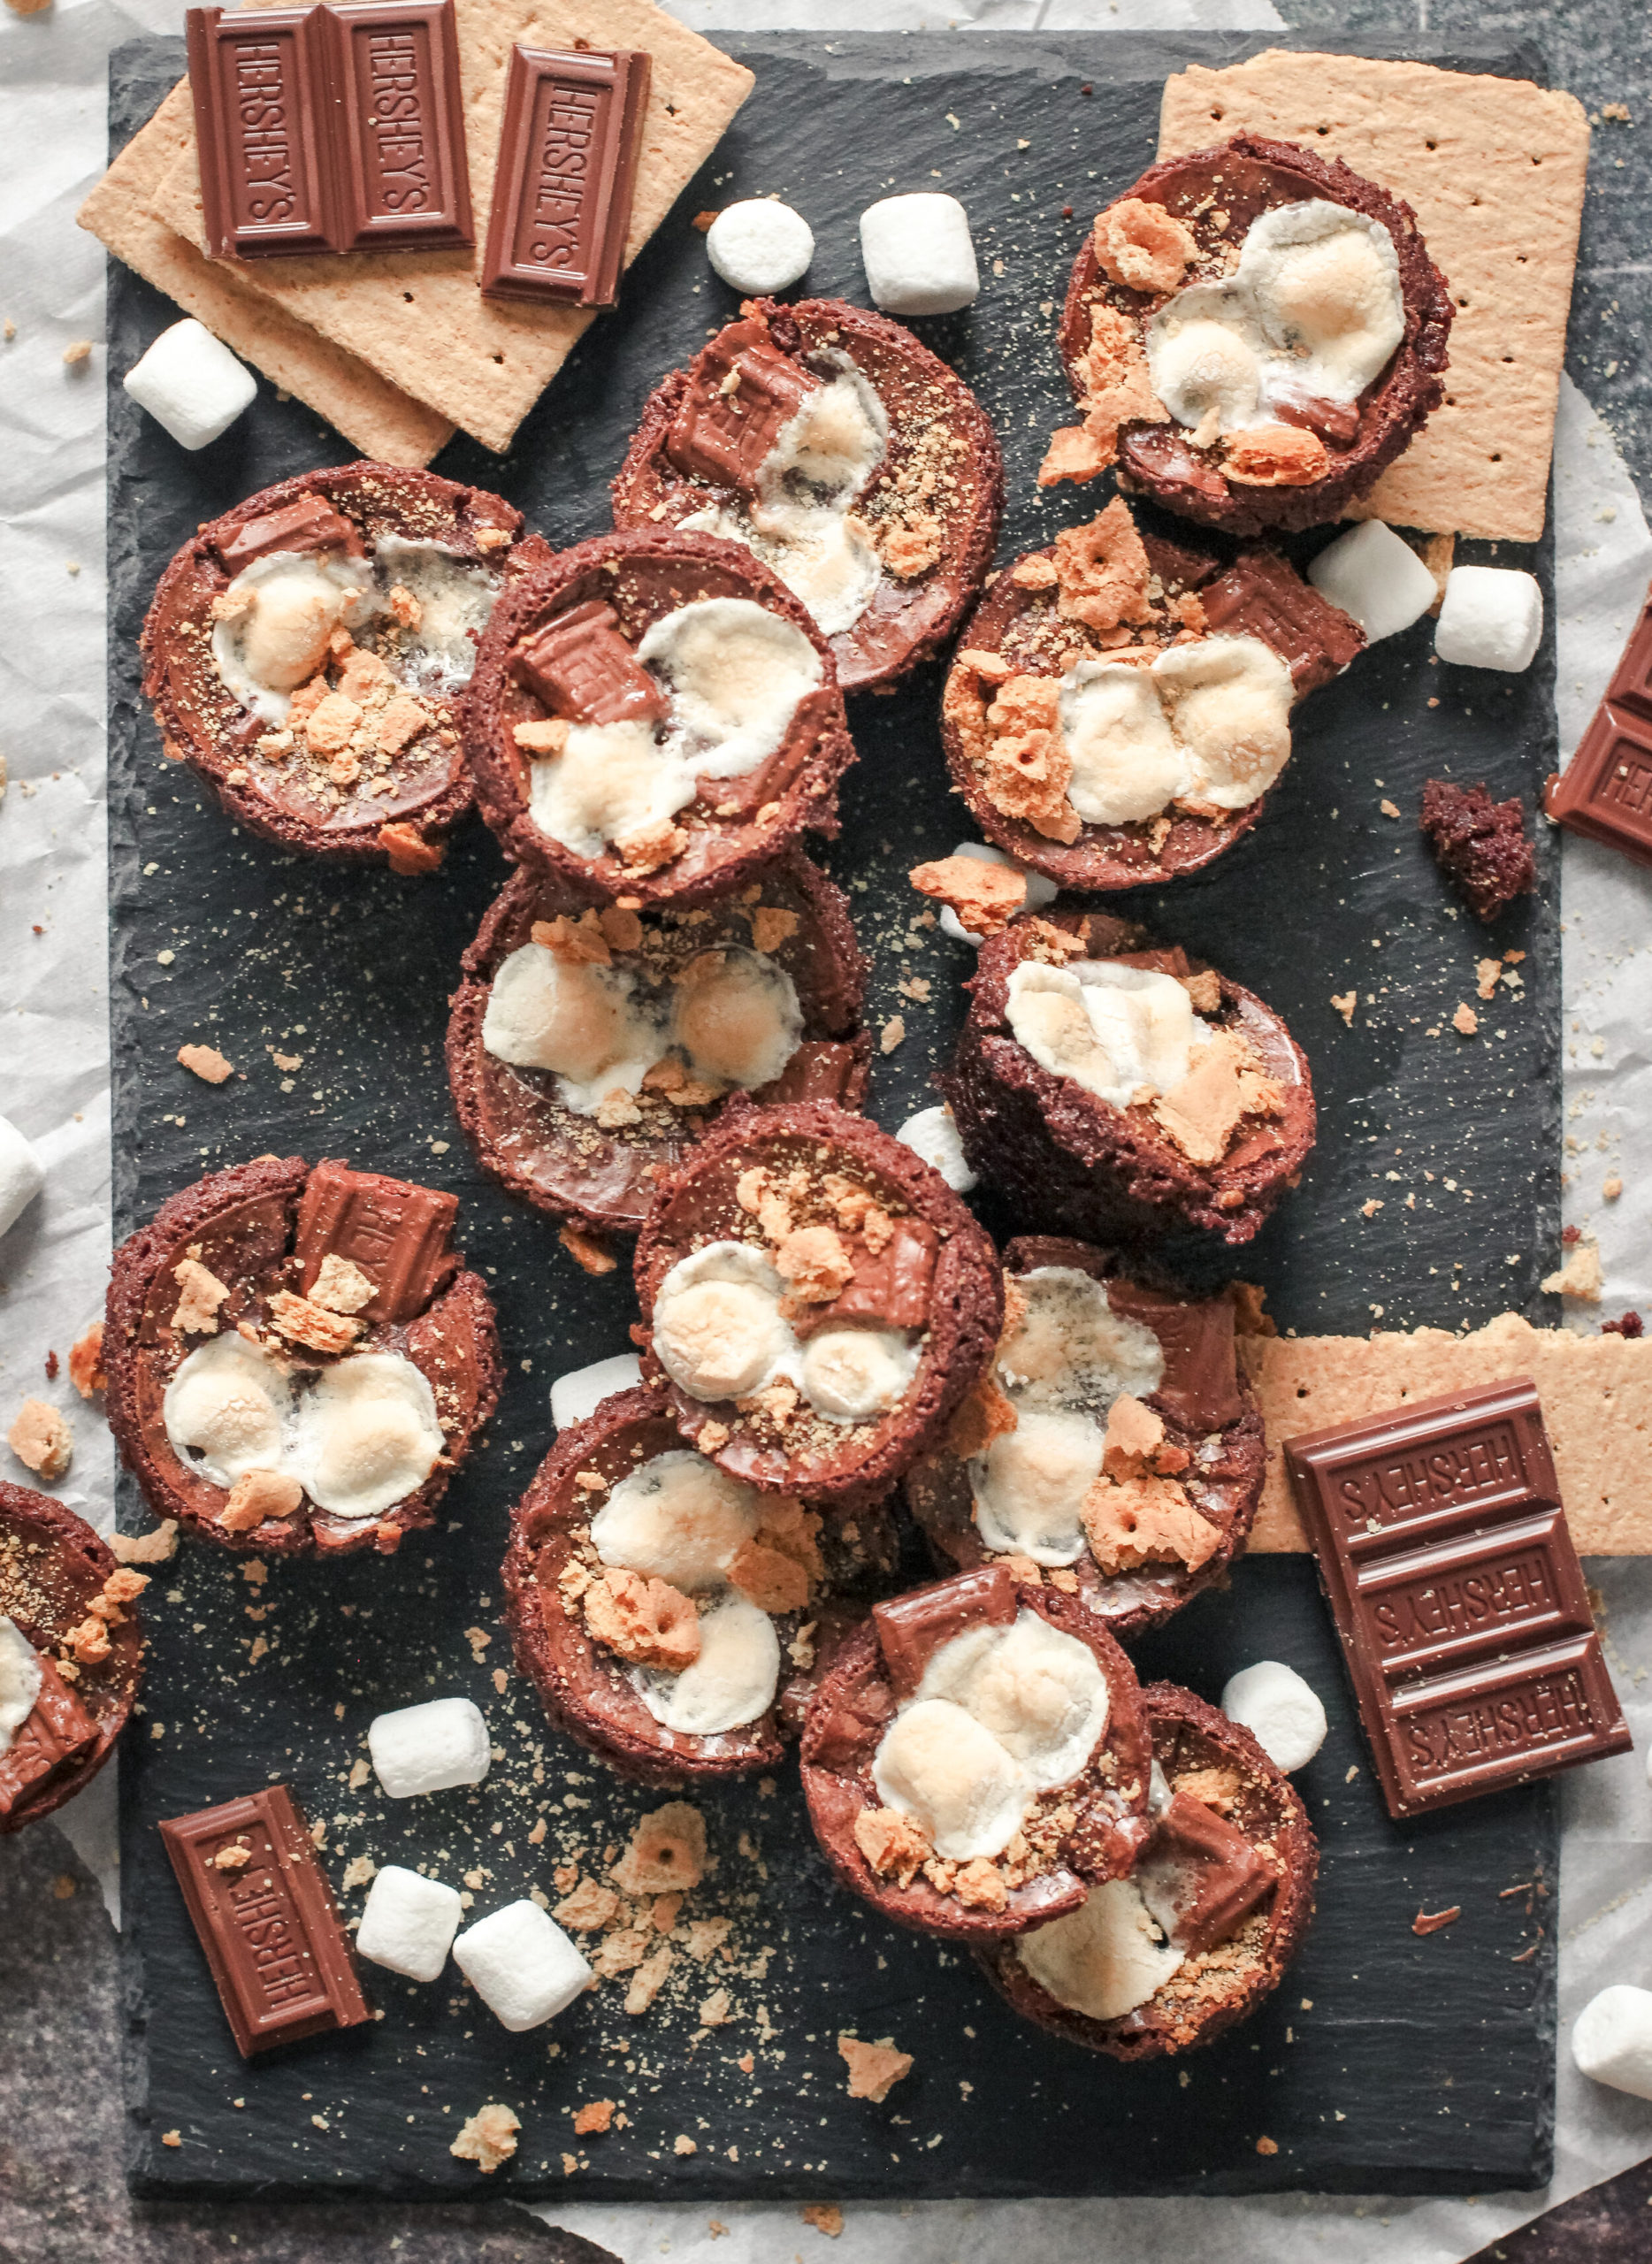 Overhead view of brownie bites, graham crackers, marshmallows and chocolate